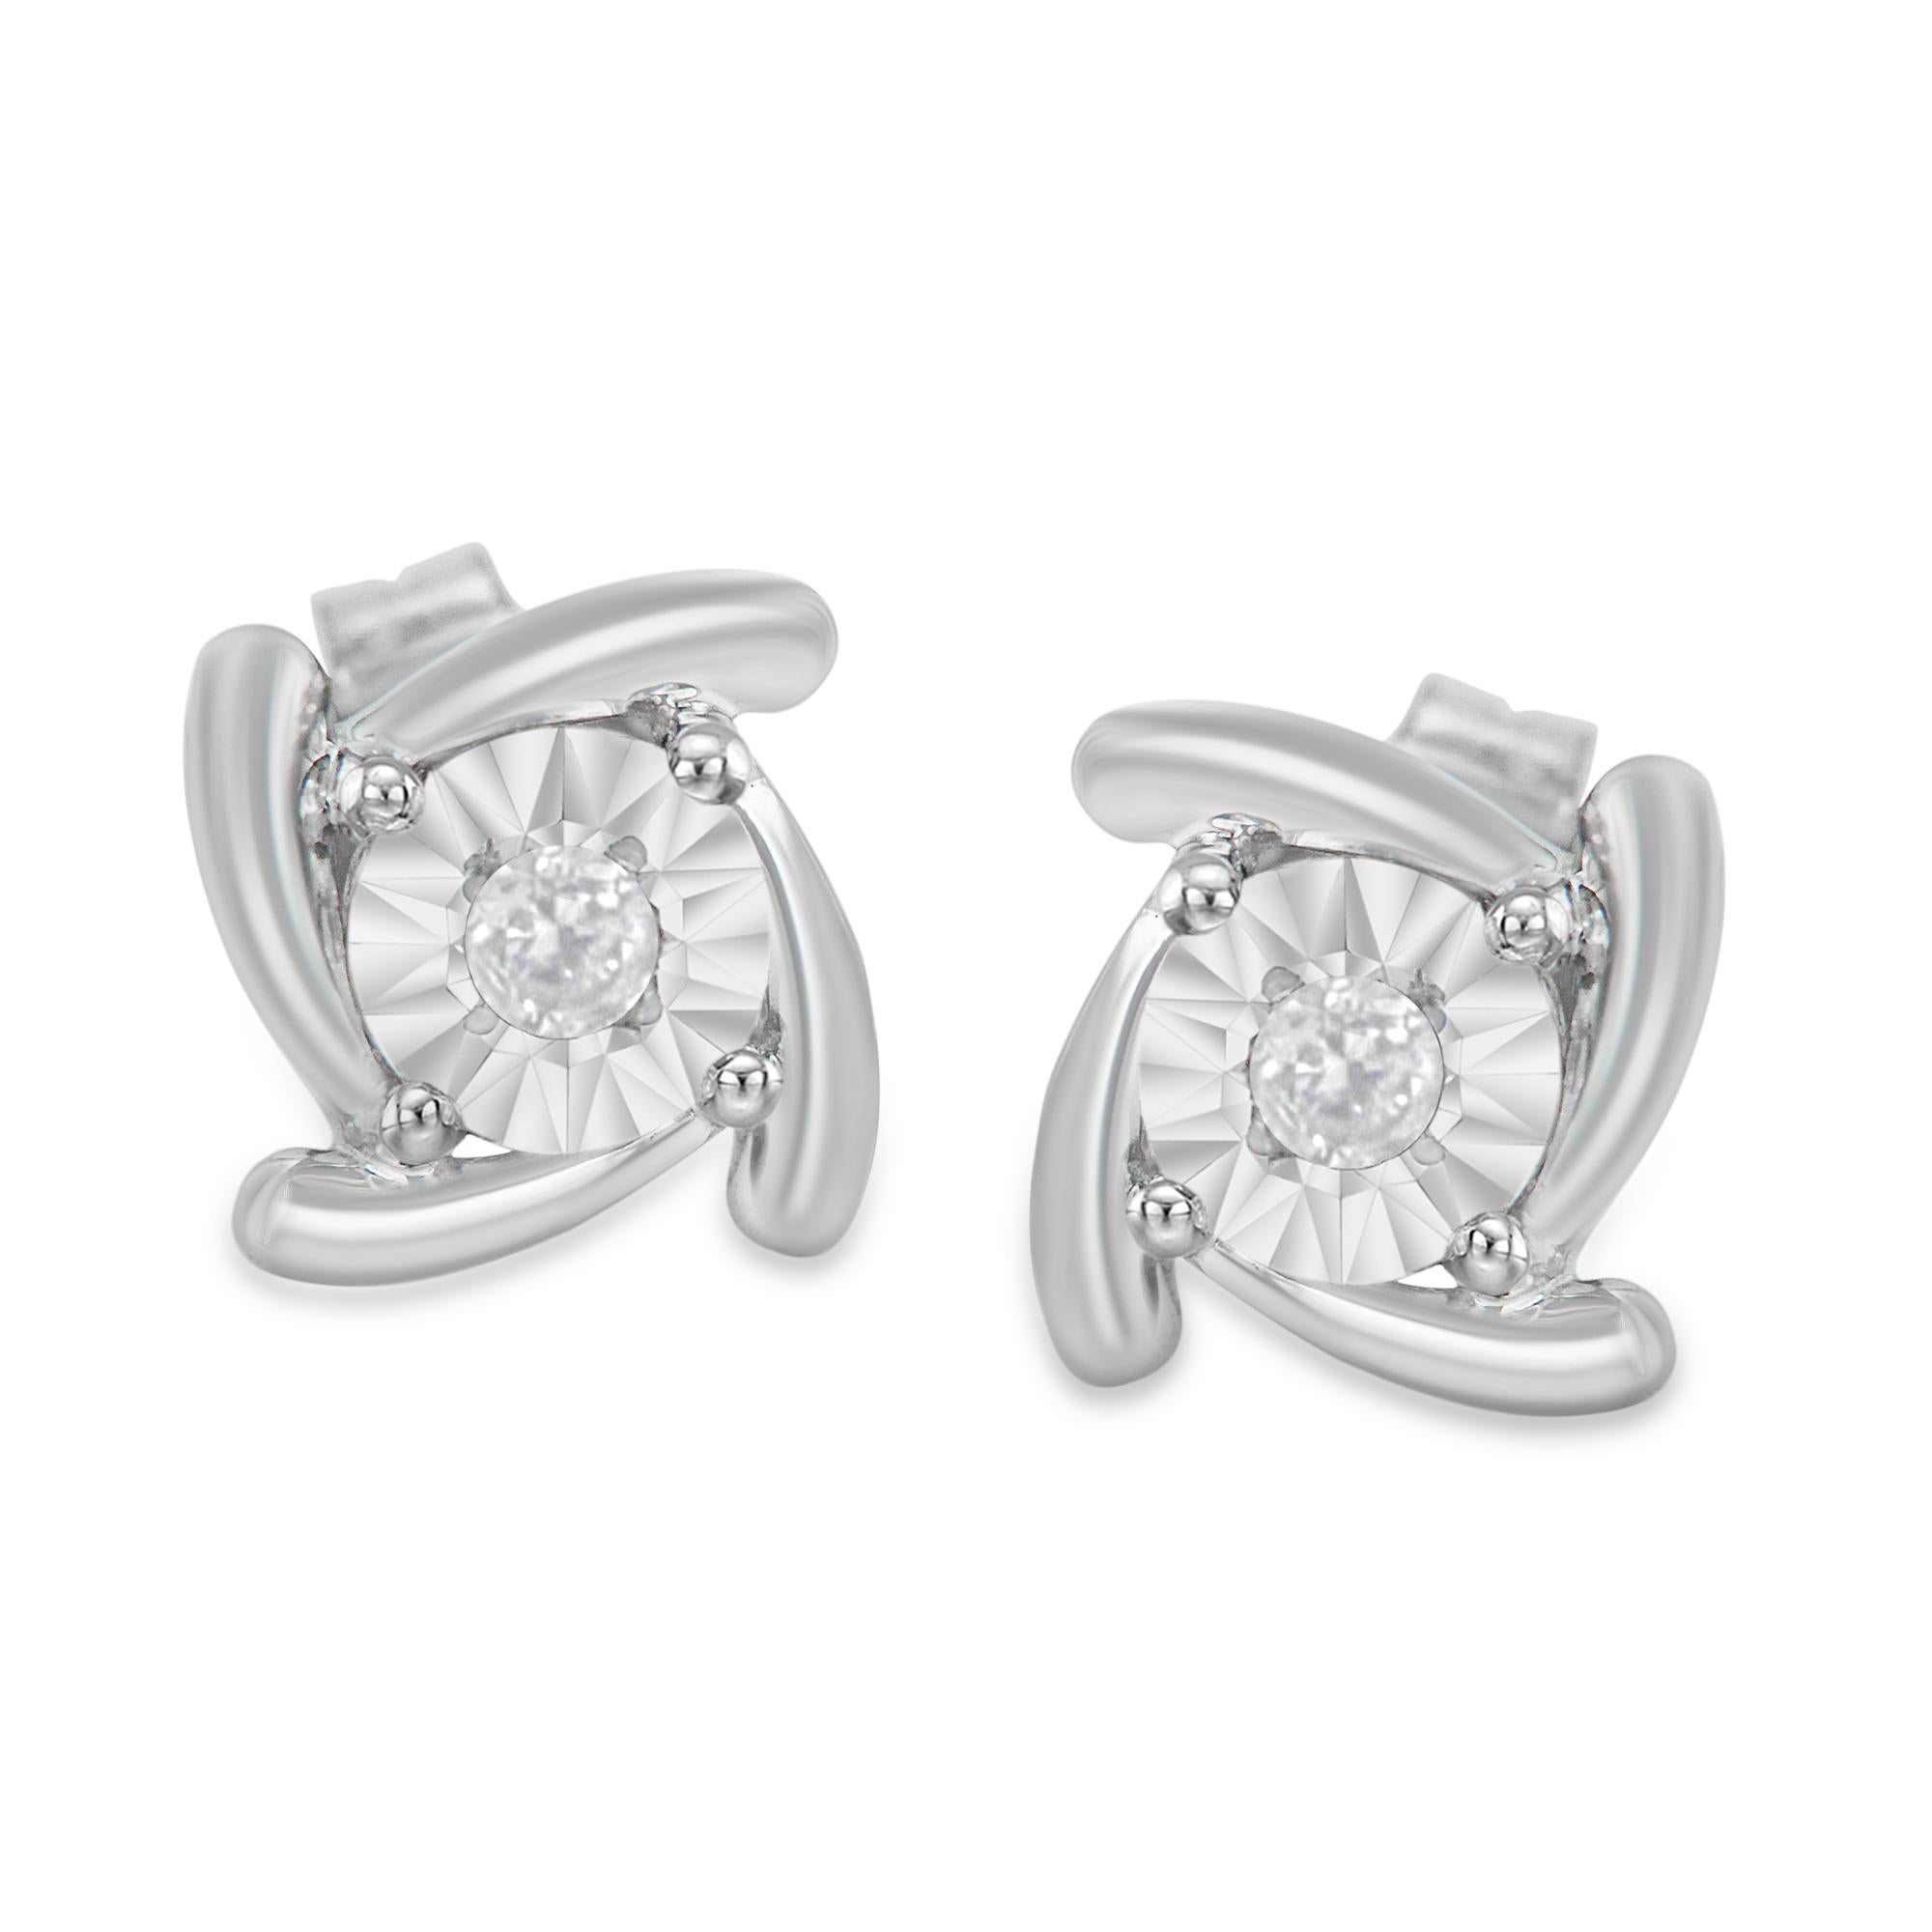 Elegant stud earrings made with .925 sterling silver and genuine diamonds. Each earing presents two diamonds with a round shape, brilliant cut and a miracle setting. This fine jewelry item has a 1/10 carats of total diamond weight and a concentric